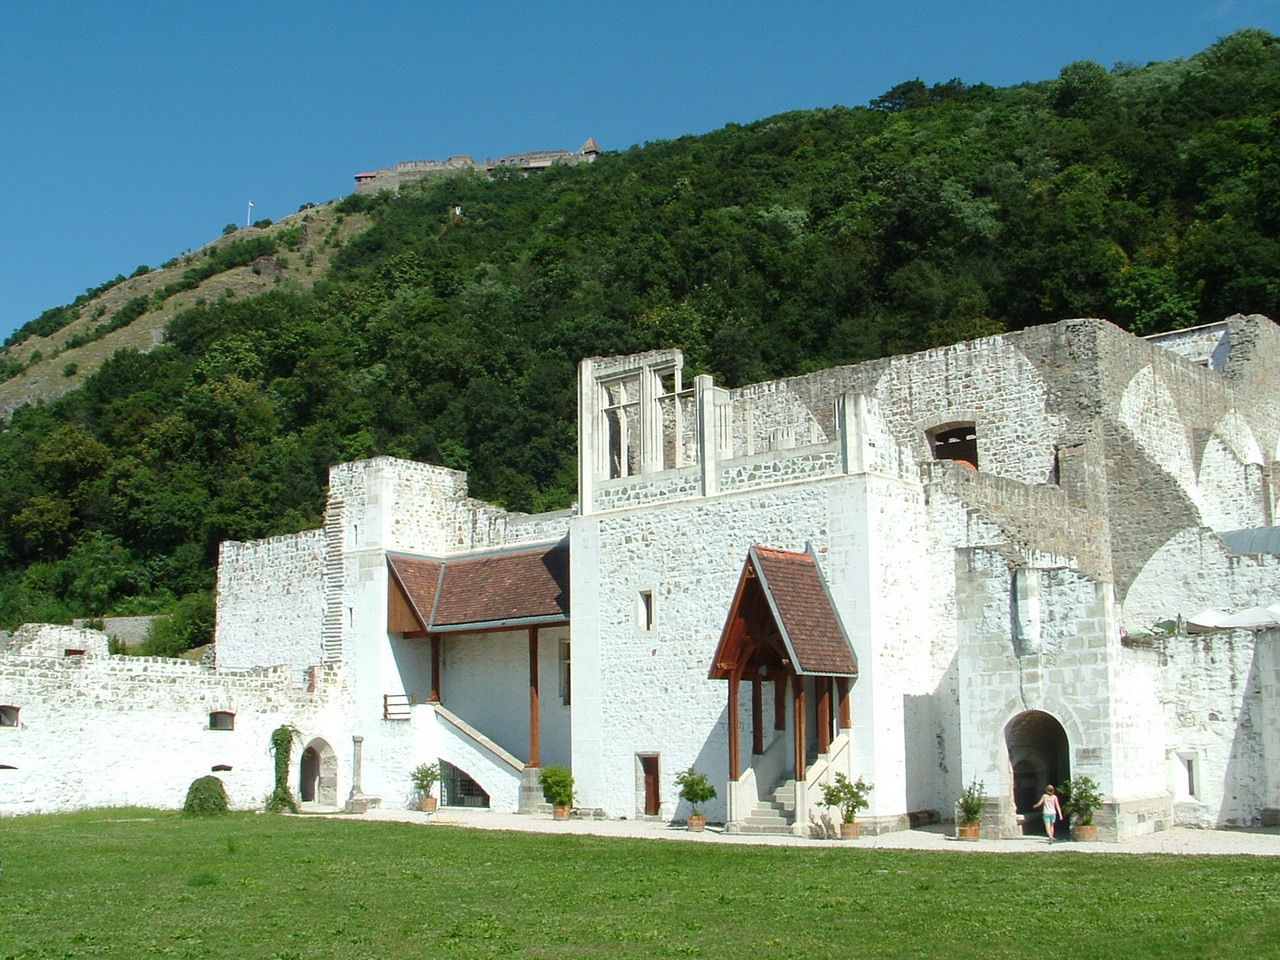 The partly renovated palast with the fortress on the top of the hill